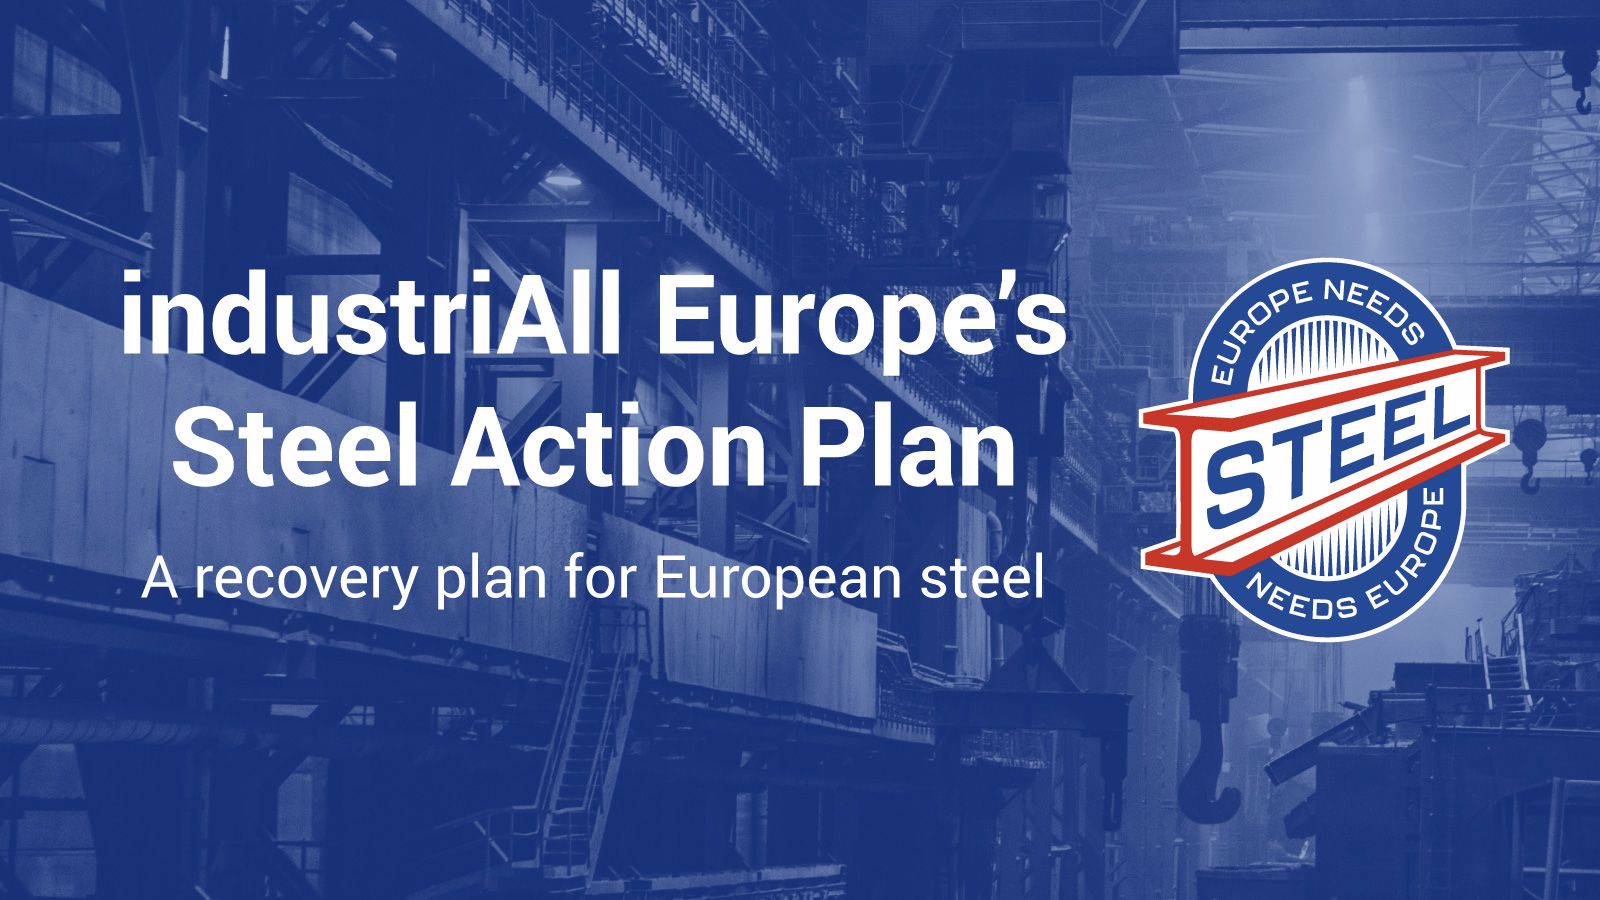 European Steel: trade unions condemn the continued lack of an industrial strategy and irresponsible company behaviour